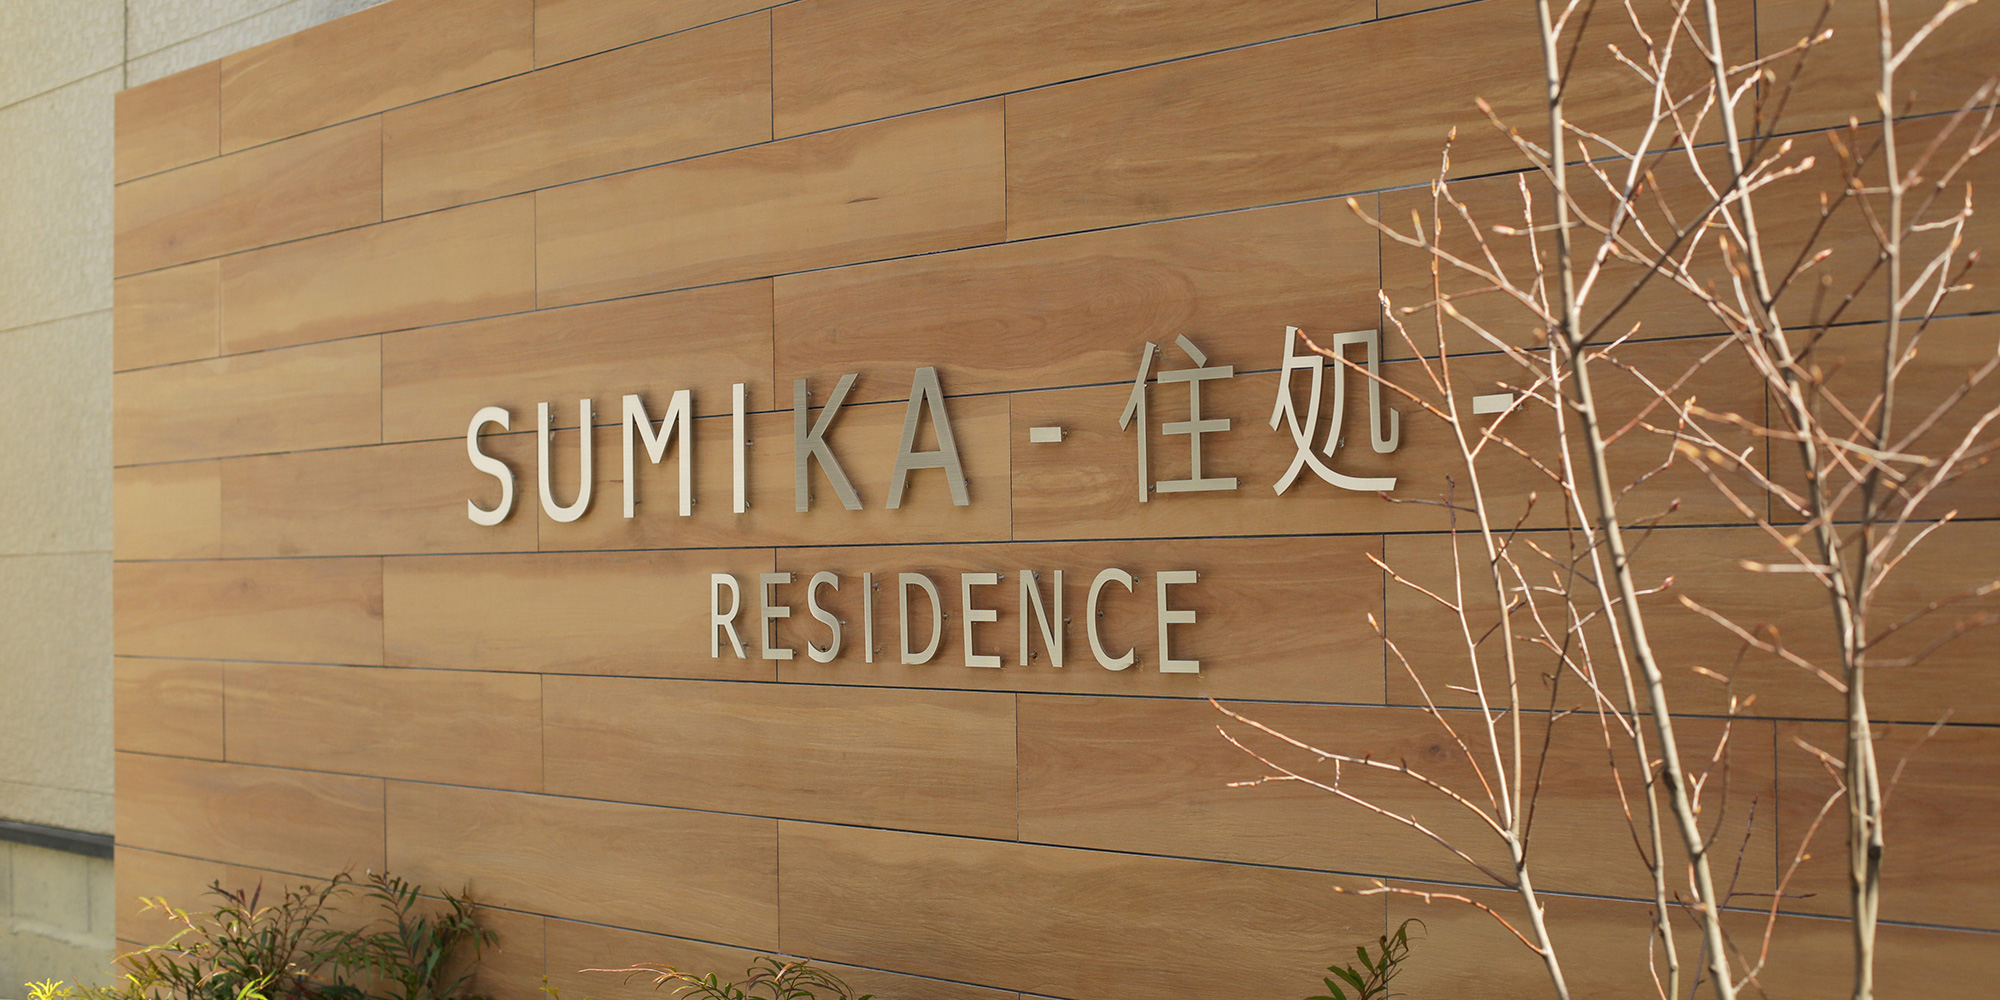 SUMIKA-住処- residence 看板